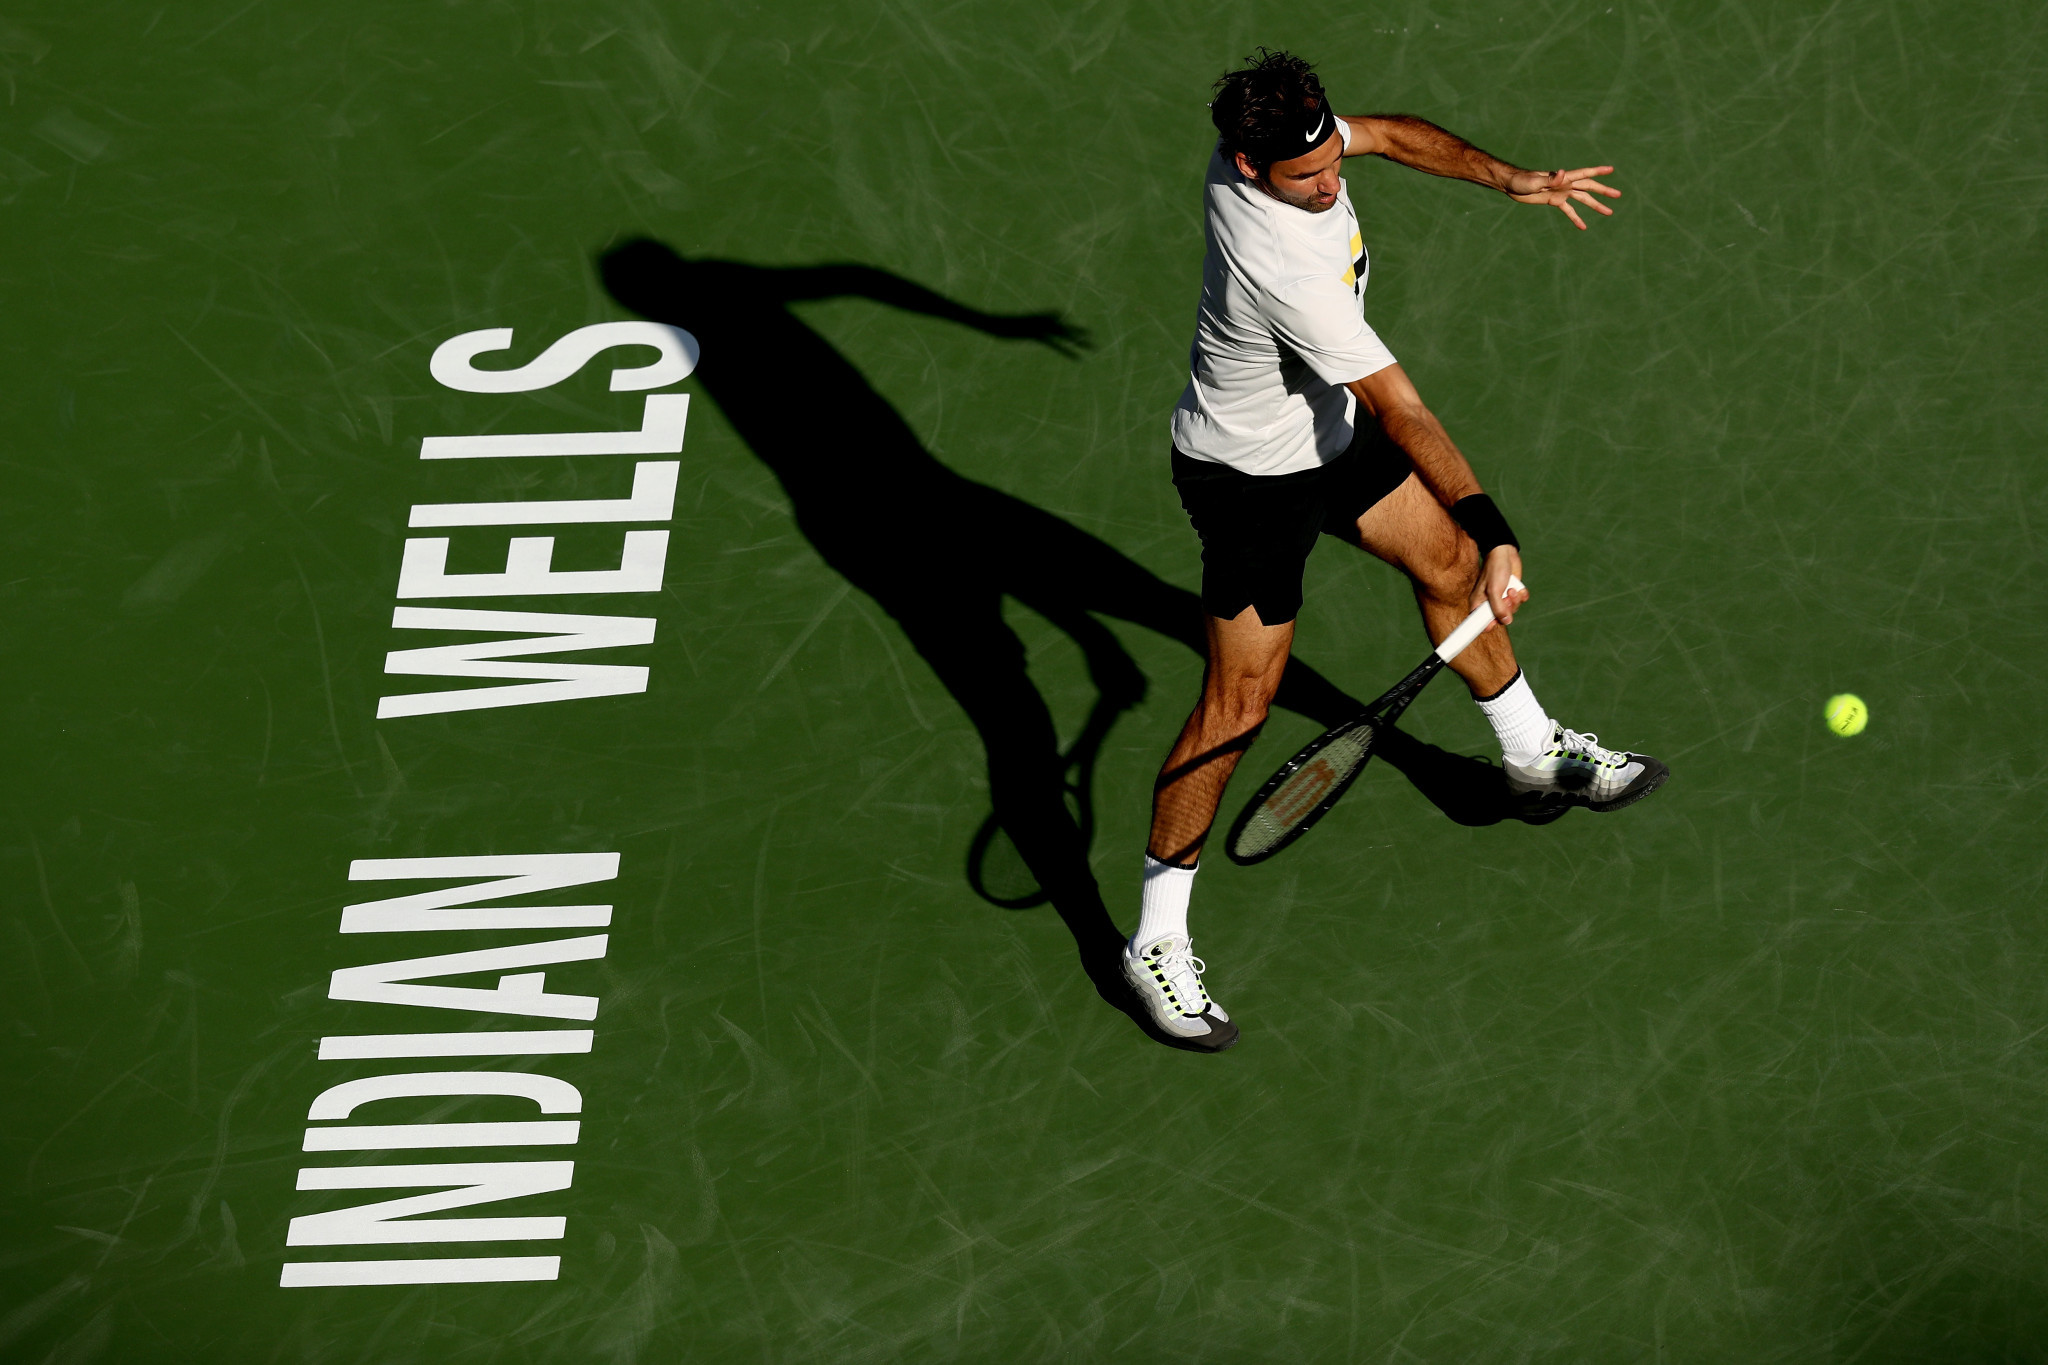 Federer eases into quarterfinals at Indian Wells Masters